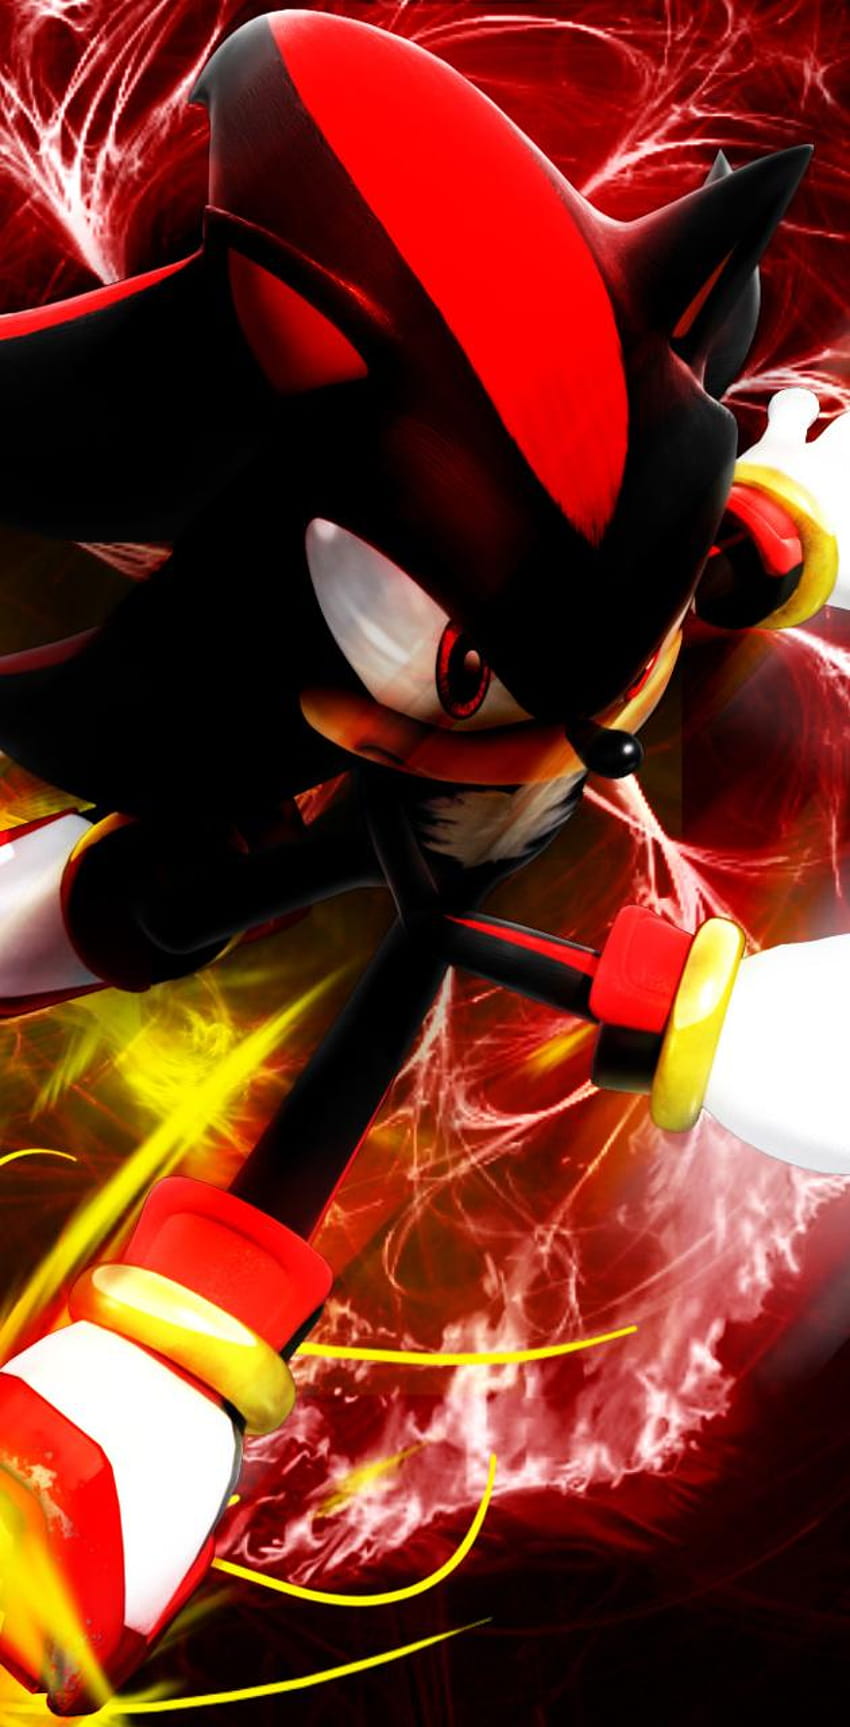 Shadow the hedgehog from Sonic Boom  In 4K by MalcomLasiurus on DeviantArt